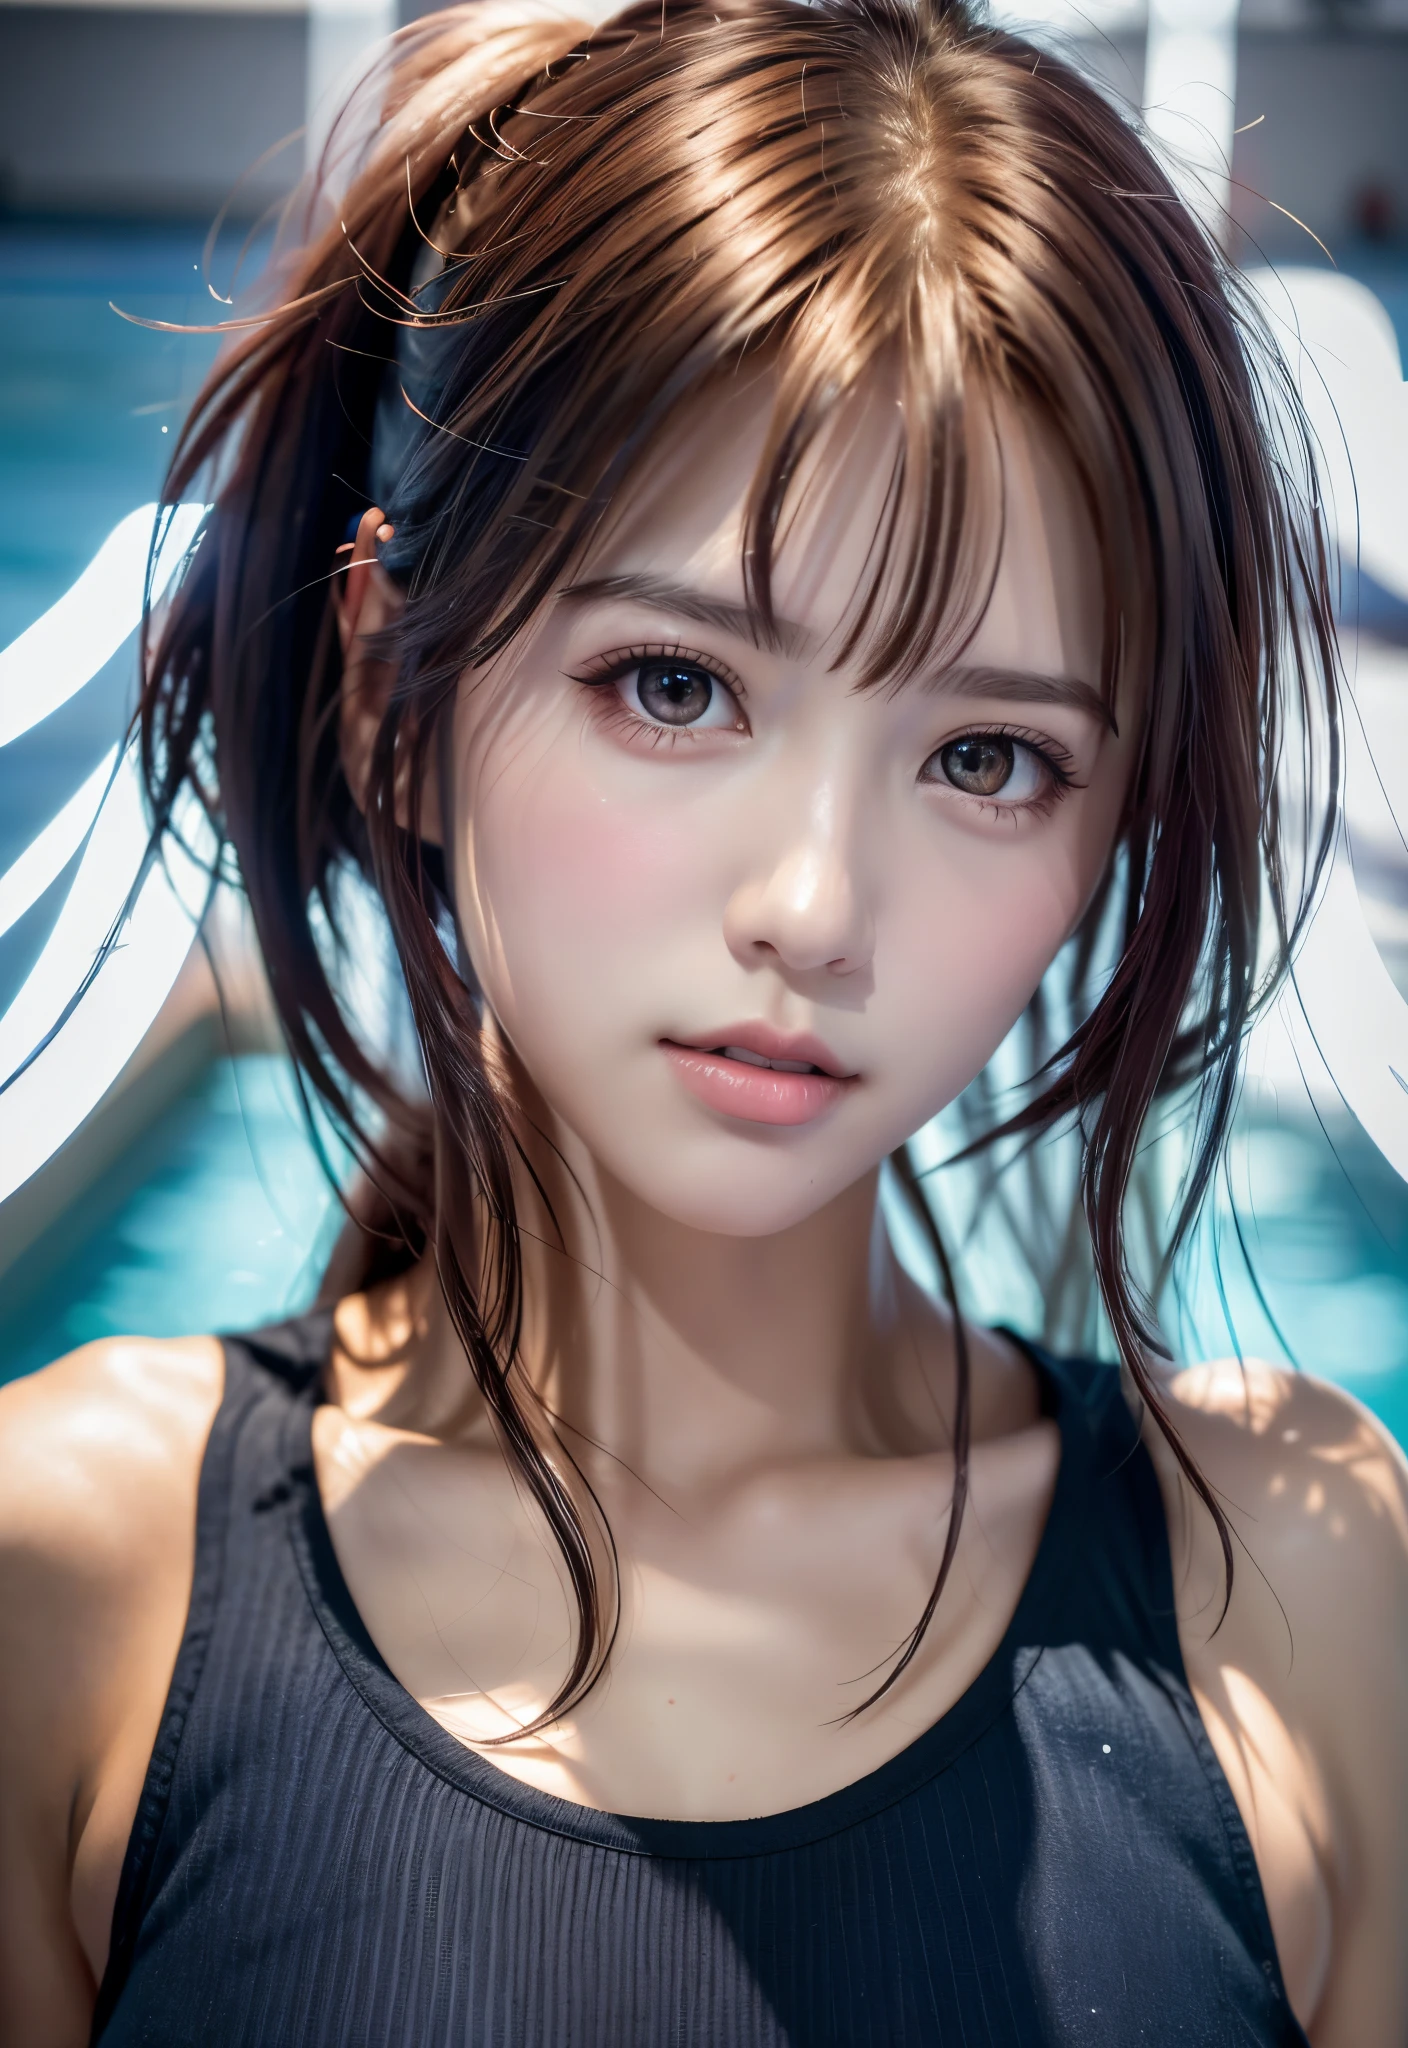 8K, of the highest quality, masutepiece:1.2), (Realistic, Photorealsitic:1.3), of the highest quality, masutepiece, Beautiful young woman, Pensive expression, Thoughtful look, Competitive swimmers、swim wears、Hair tied back, Cinematic background, Light skin tone、wetted skin